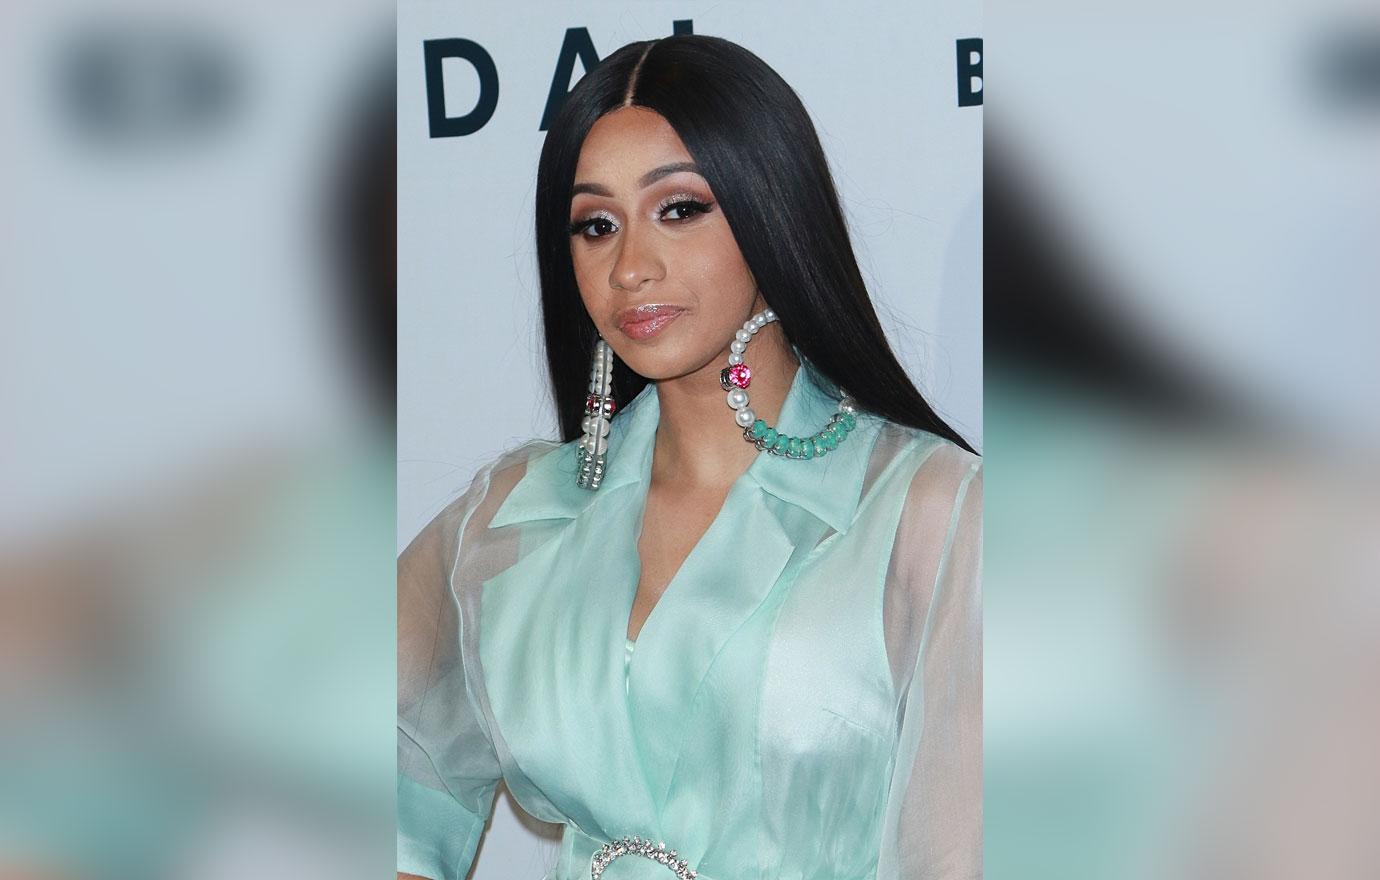 [Cardi B] Goes On A Curse-Laden Rant About Paying Taxes